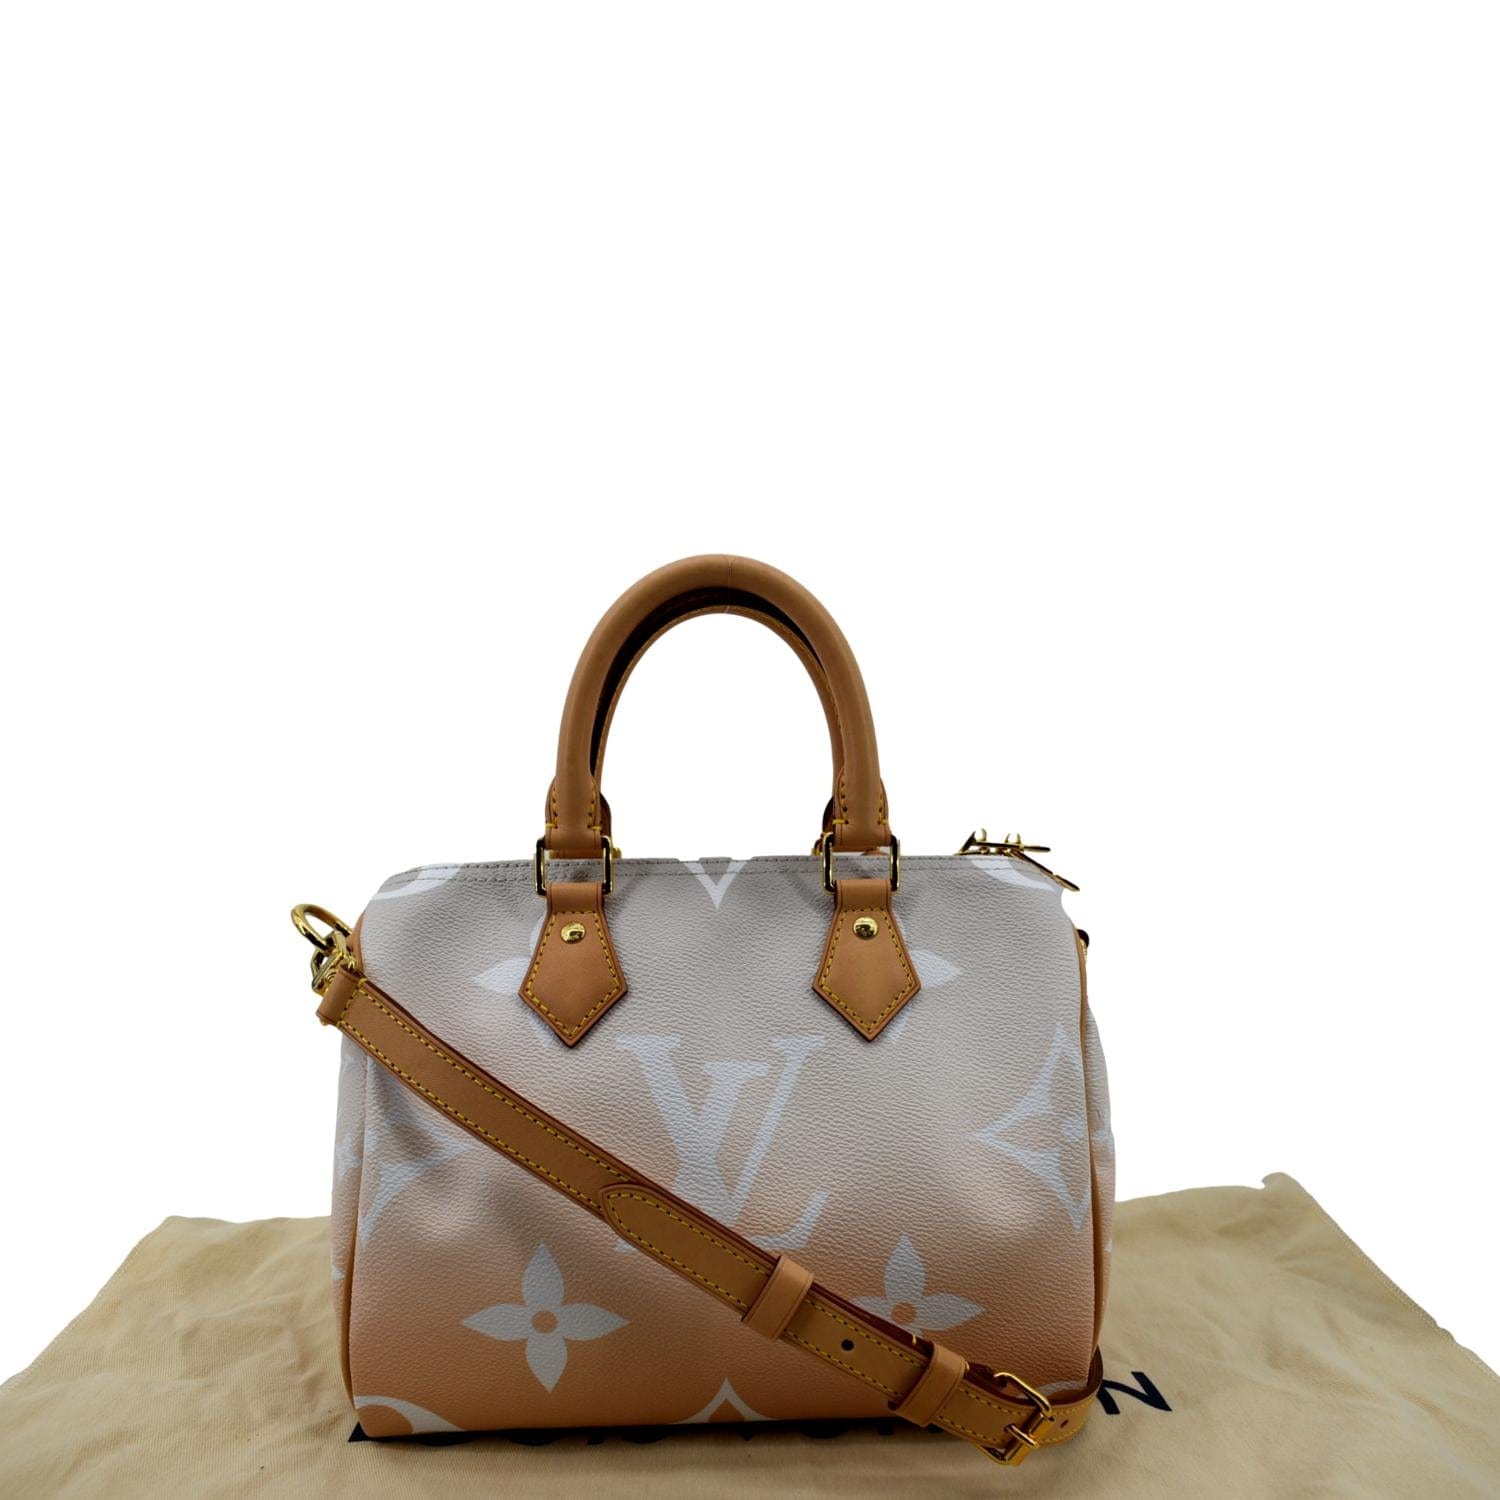 Louis Vuitton Speedy 25 Bandouliere By The Pool Brume Mist Gray NEW IN BOX